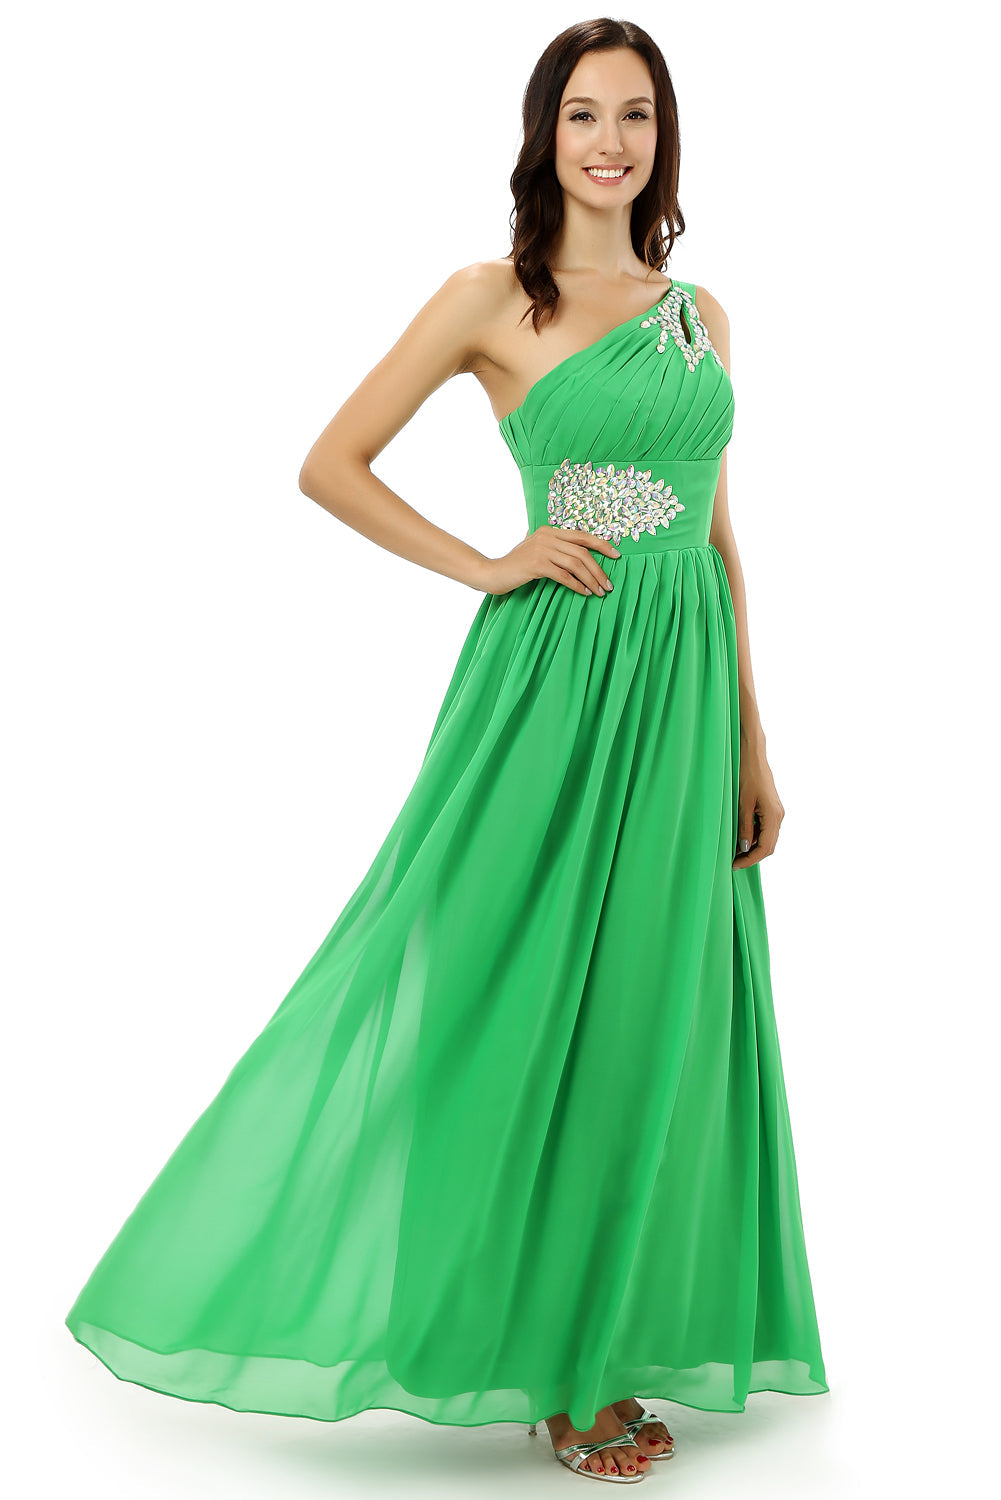 Homecoming Dress Online, Green One Shoulder Chiffon With Crystal Pleats Bridesmaid Dresses